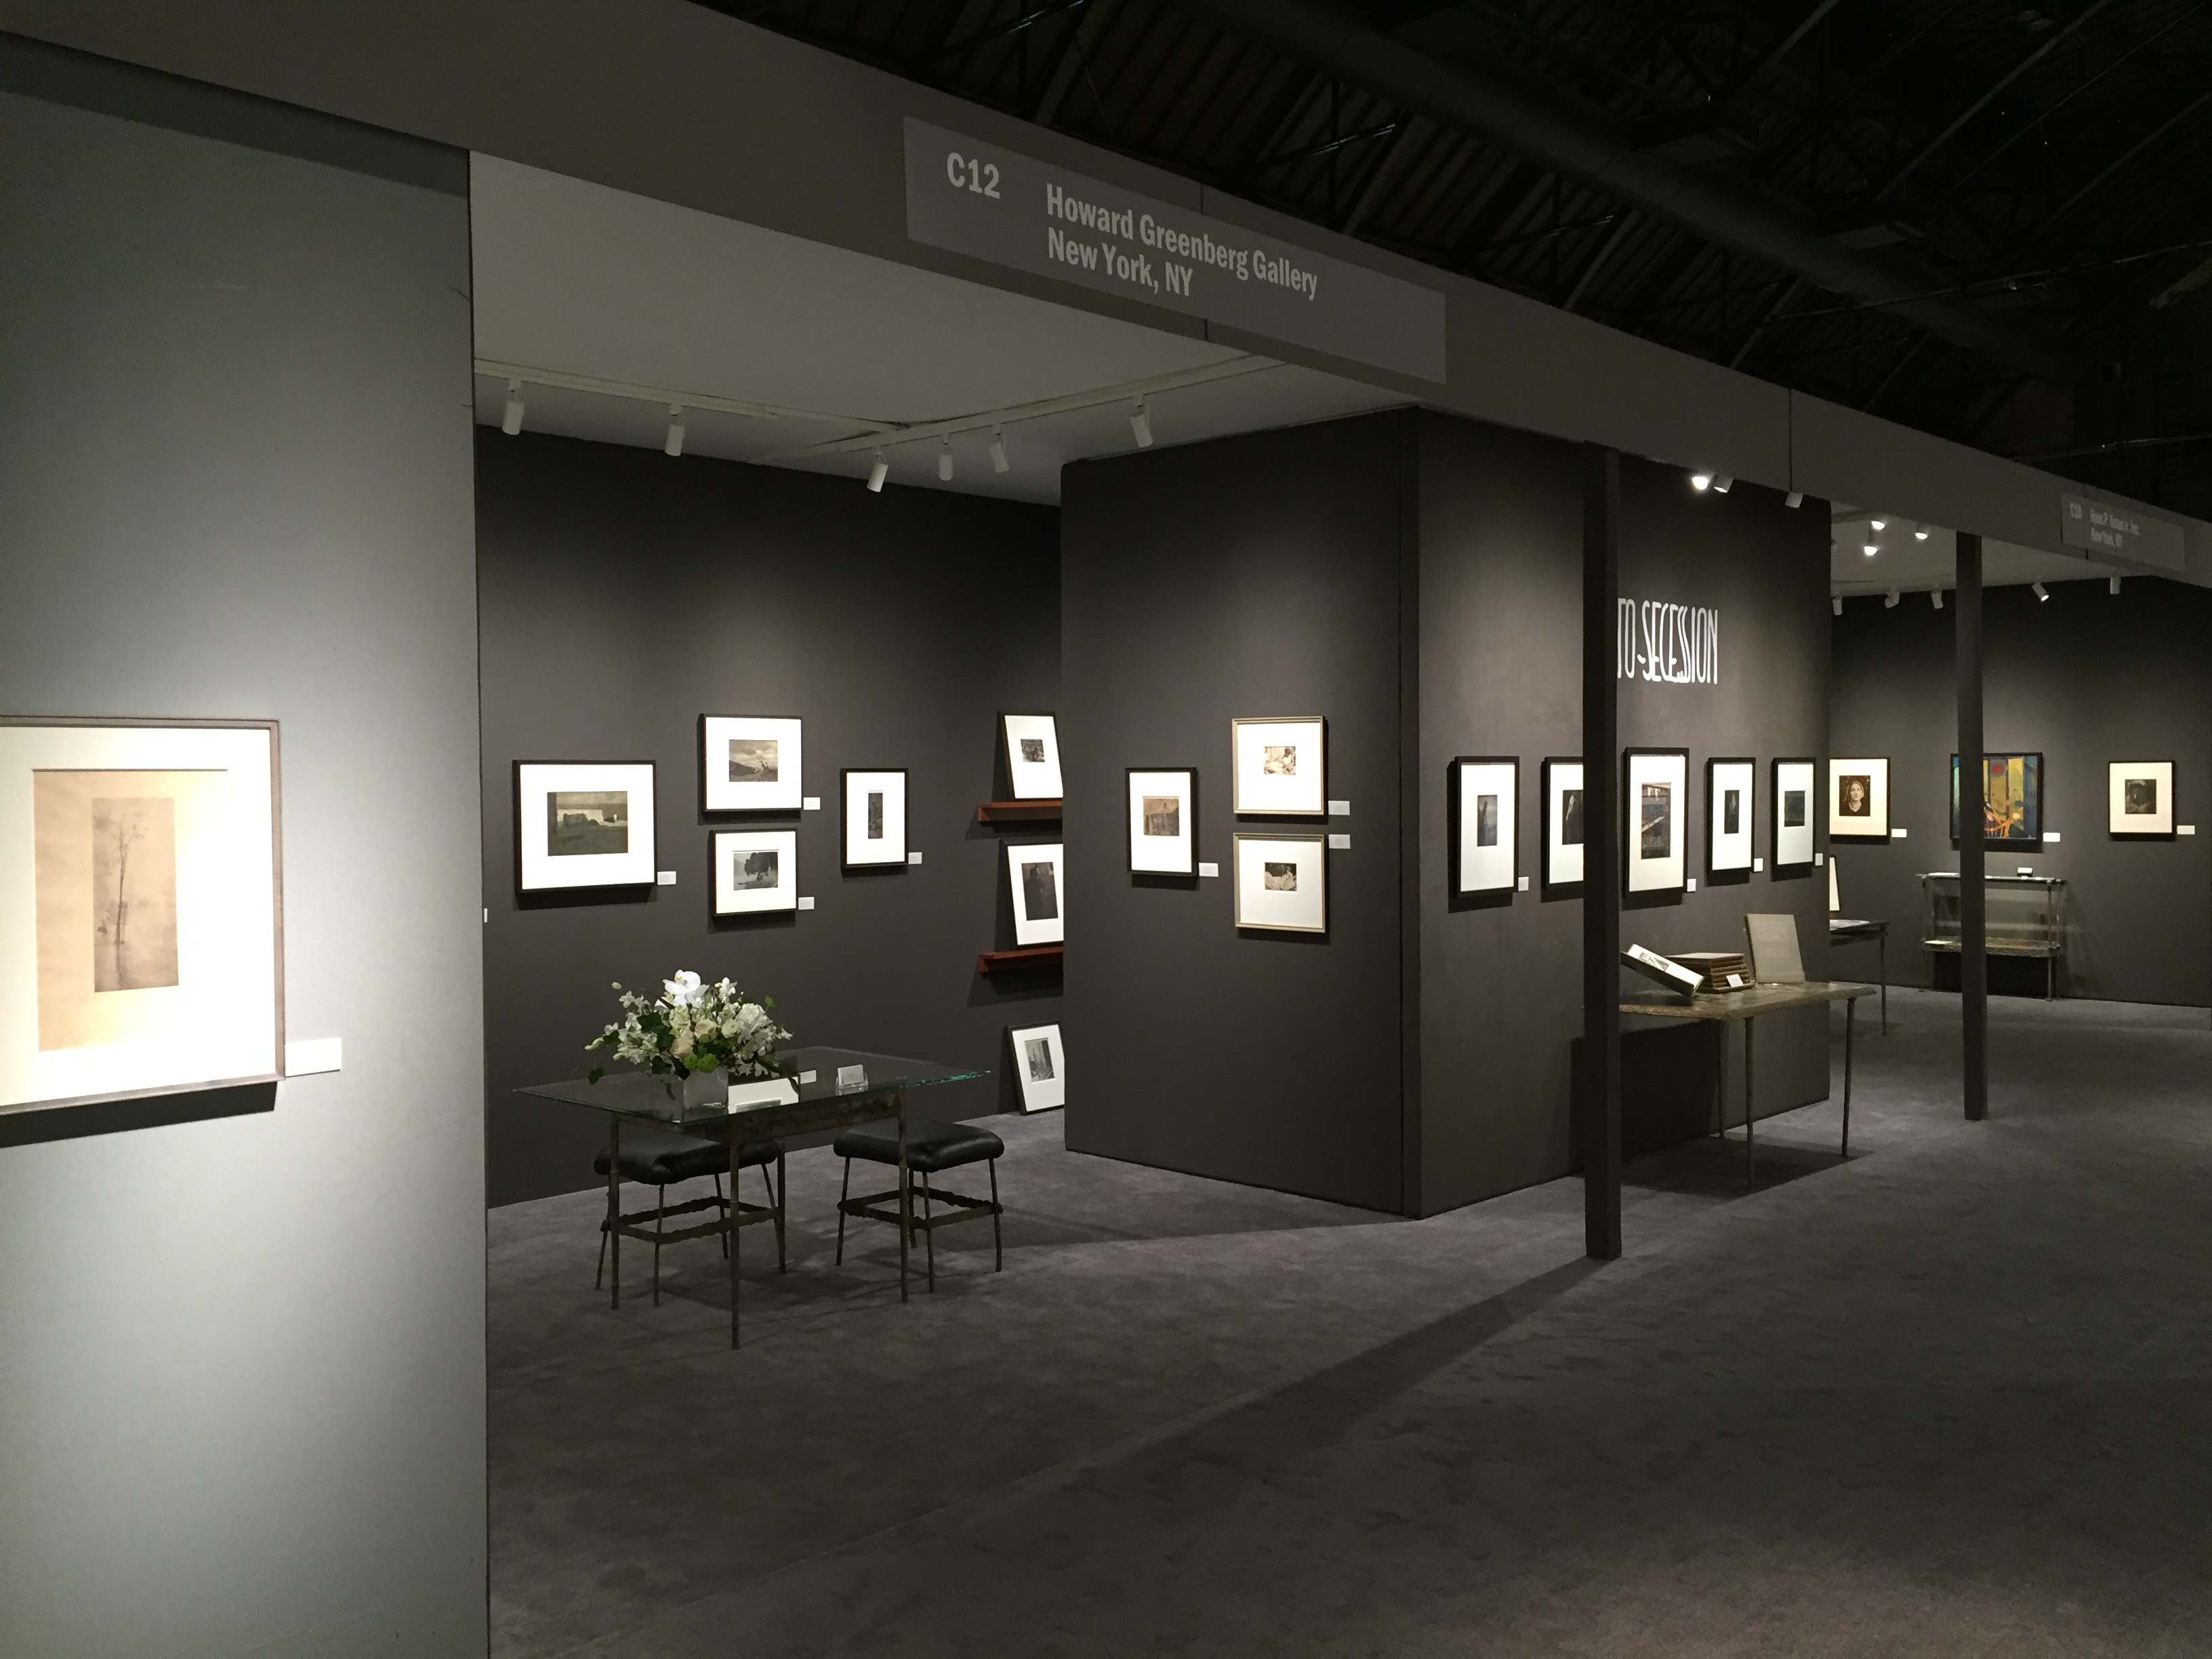 HGG Booth featured in "What Not to Miss at the Art Show at the Armory" in the New York Times